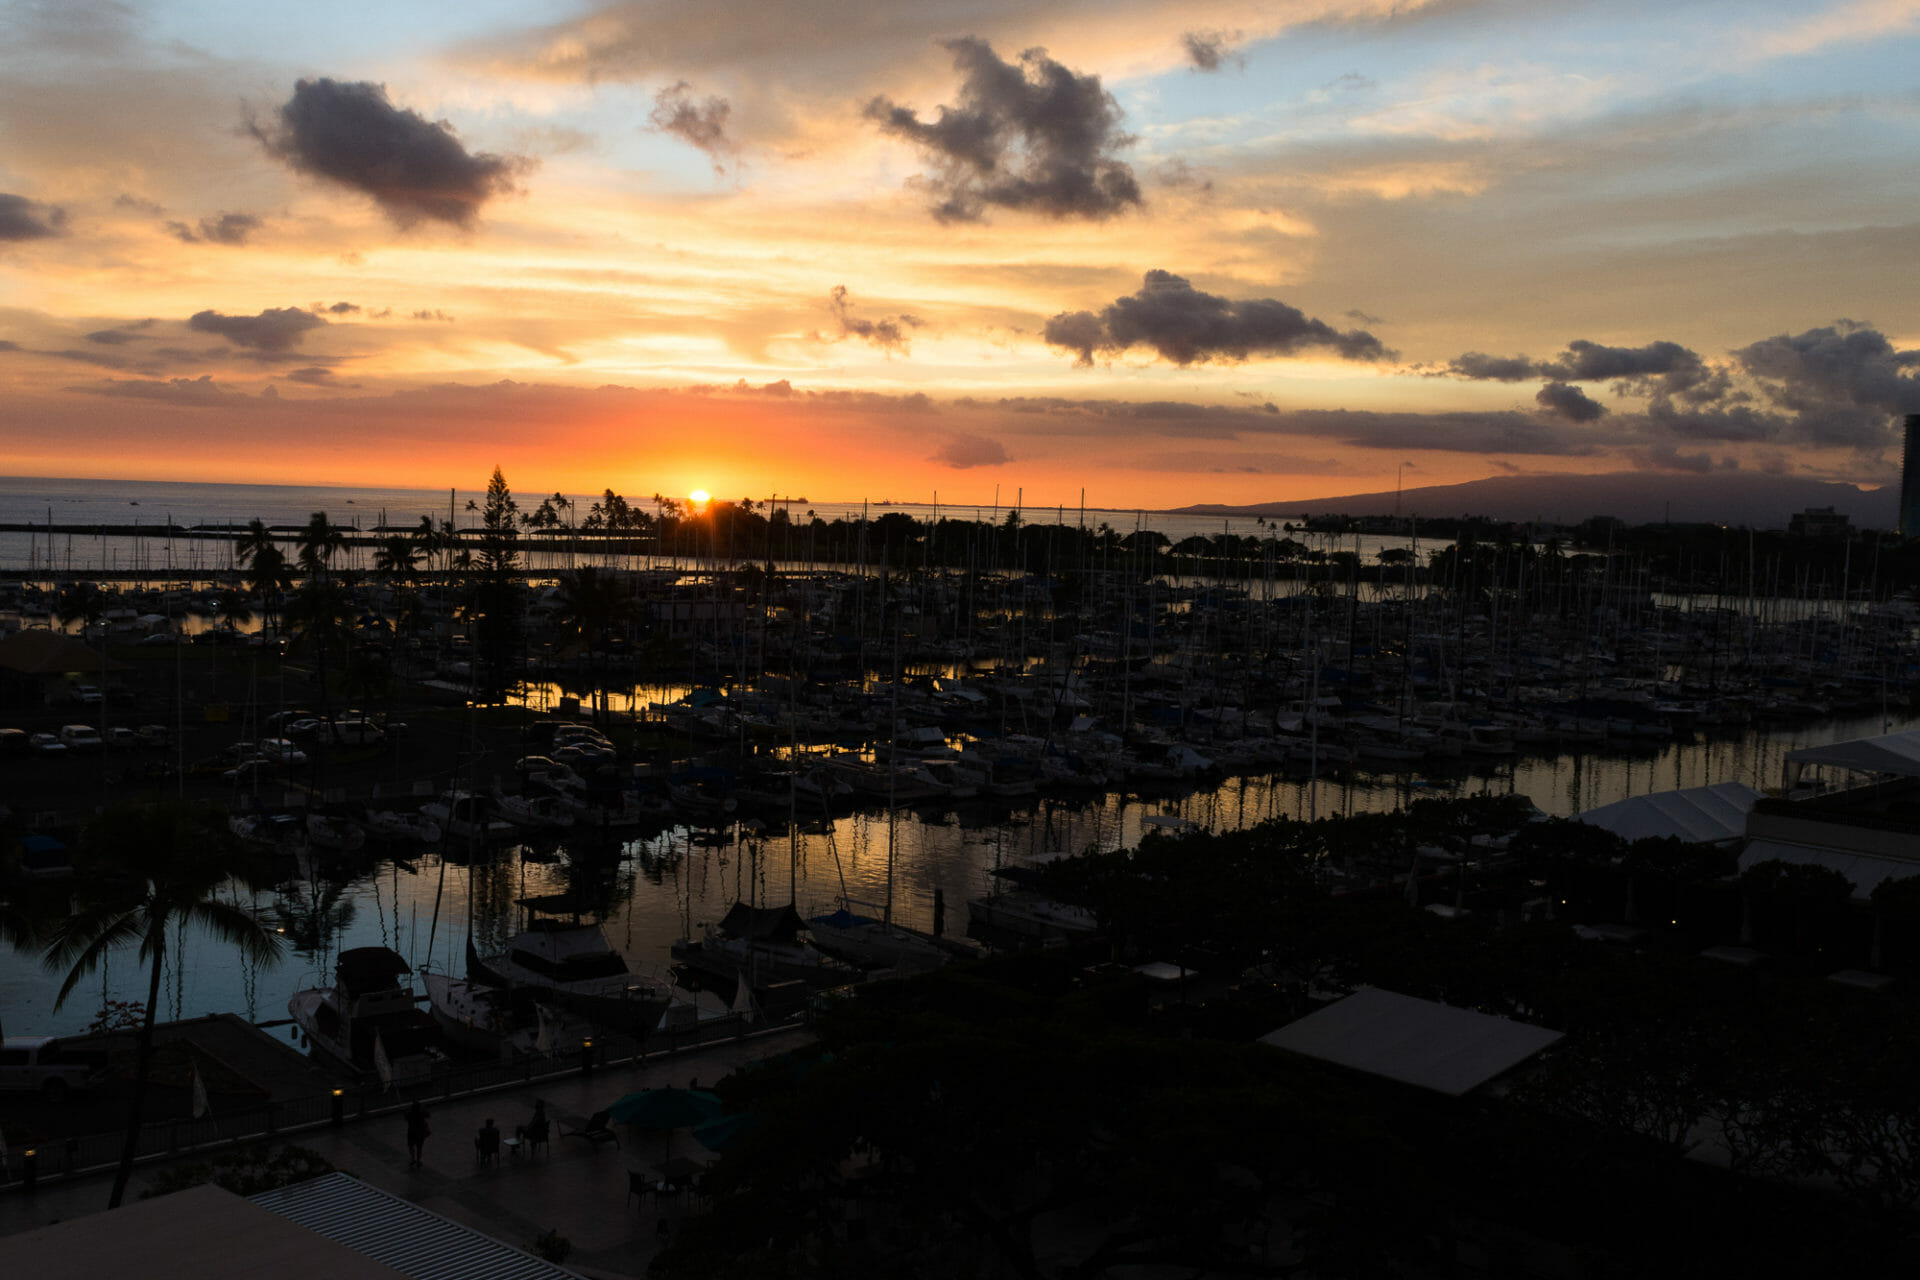 Ala Wai Harbor with sunset almost done.